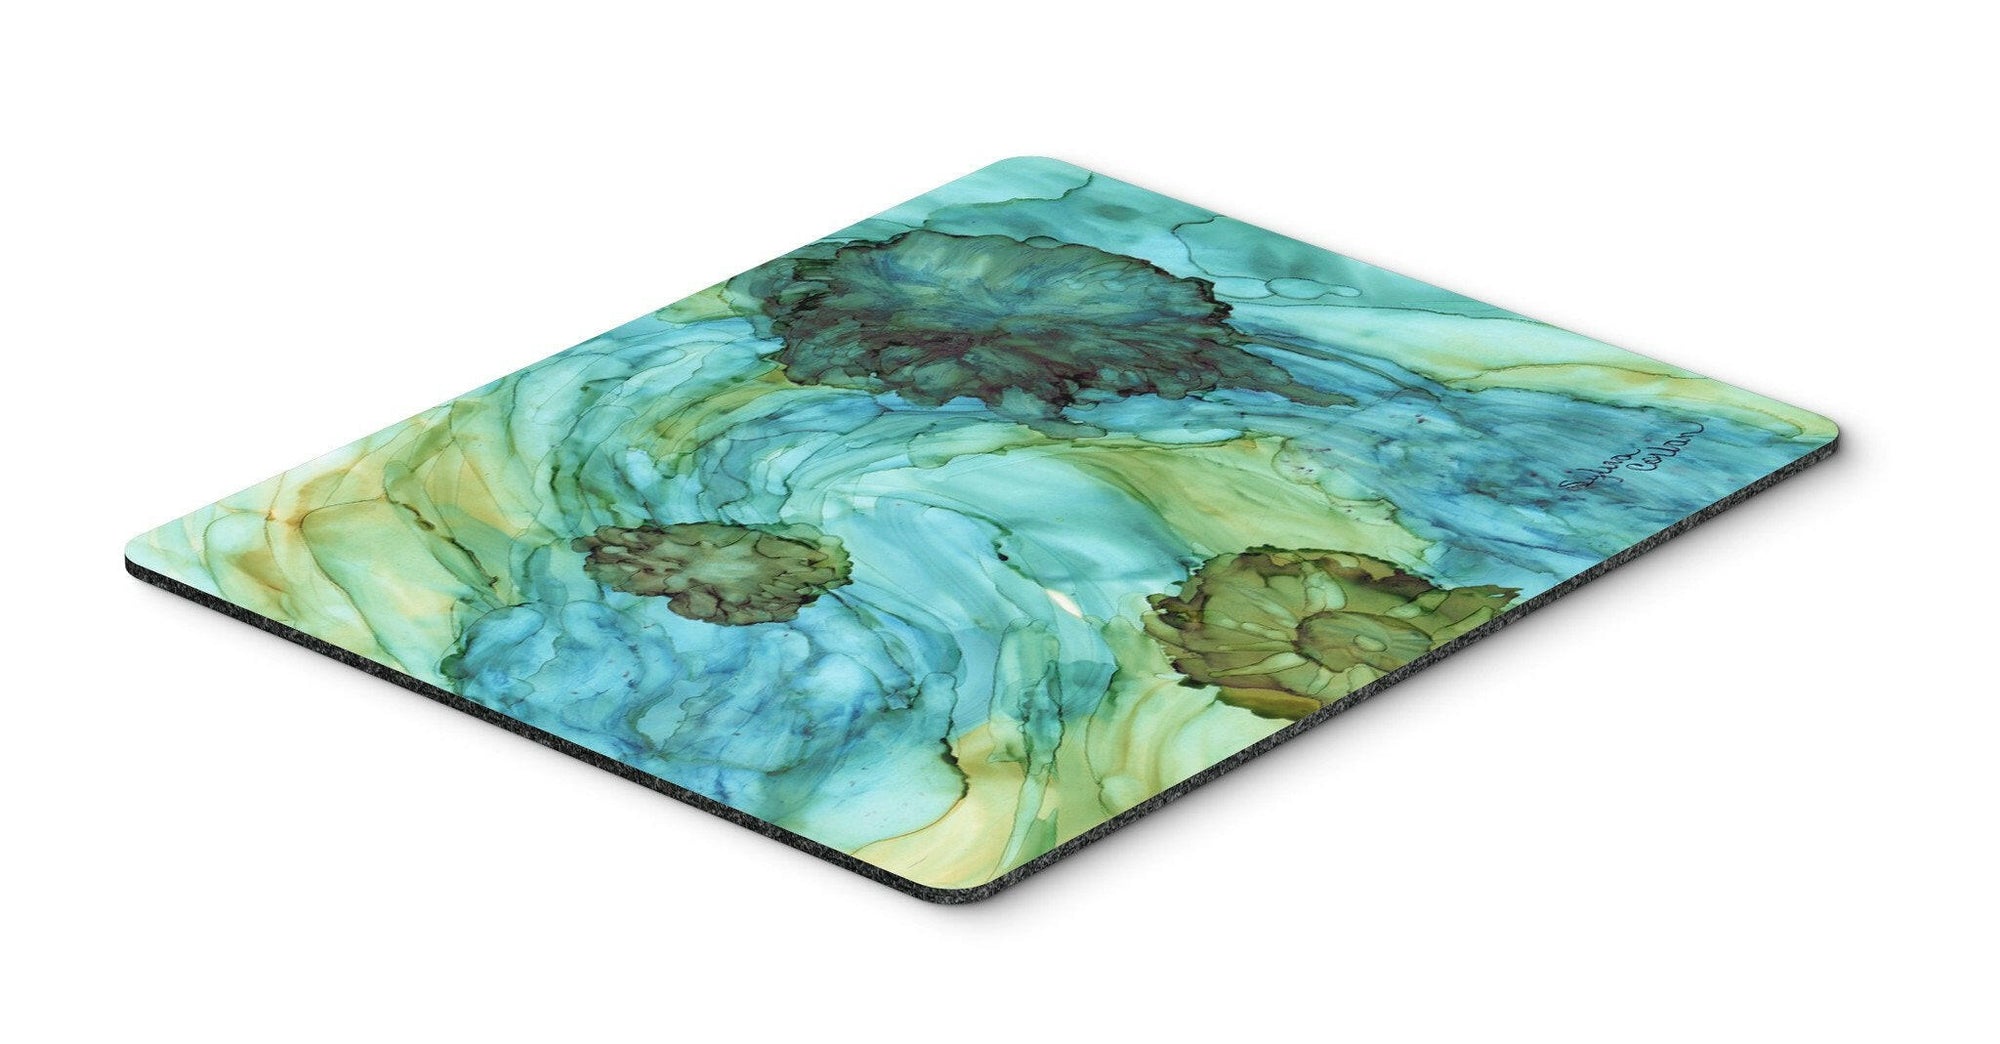 Abstract in Teal Flowers Mouse Pad, Hot Pad or Trivet 8952MP by Caroline's Treasures